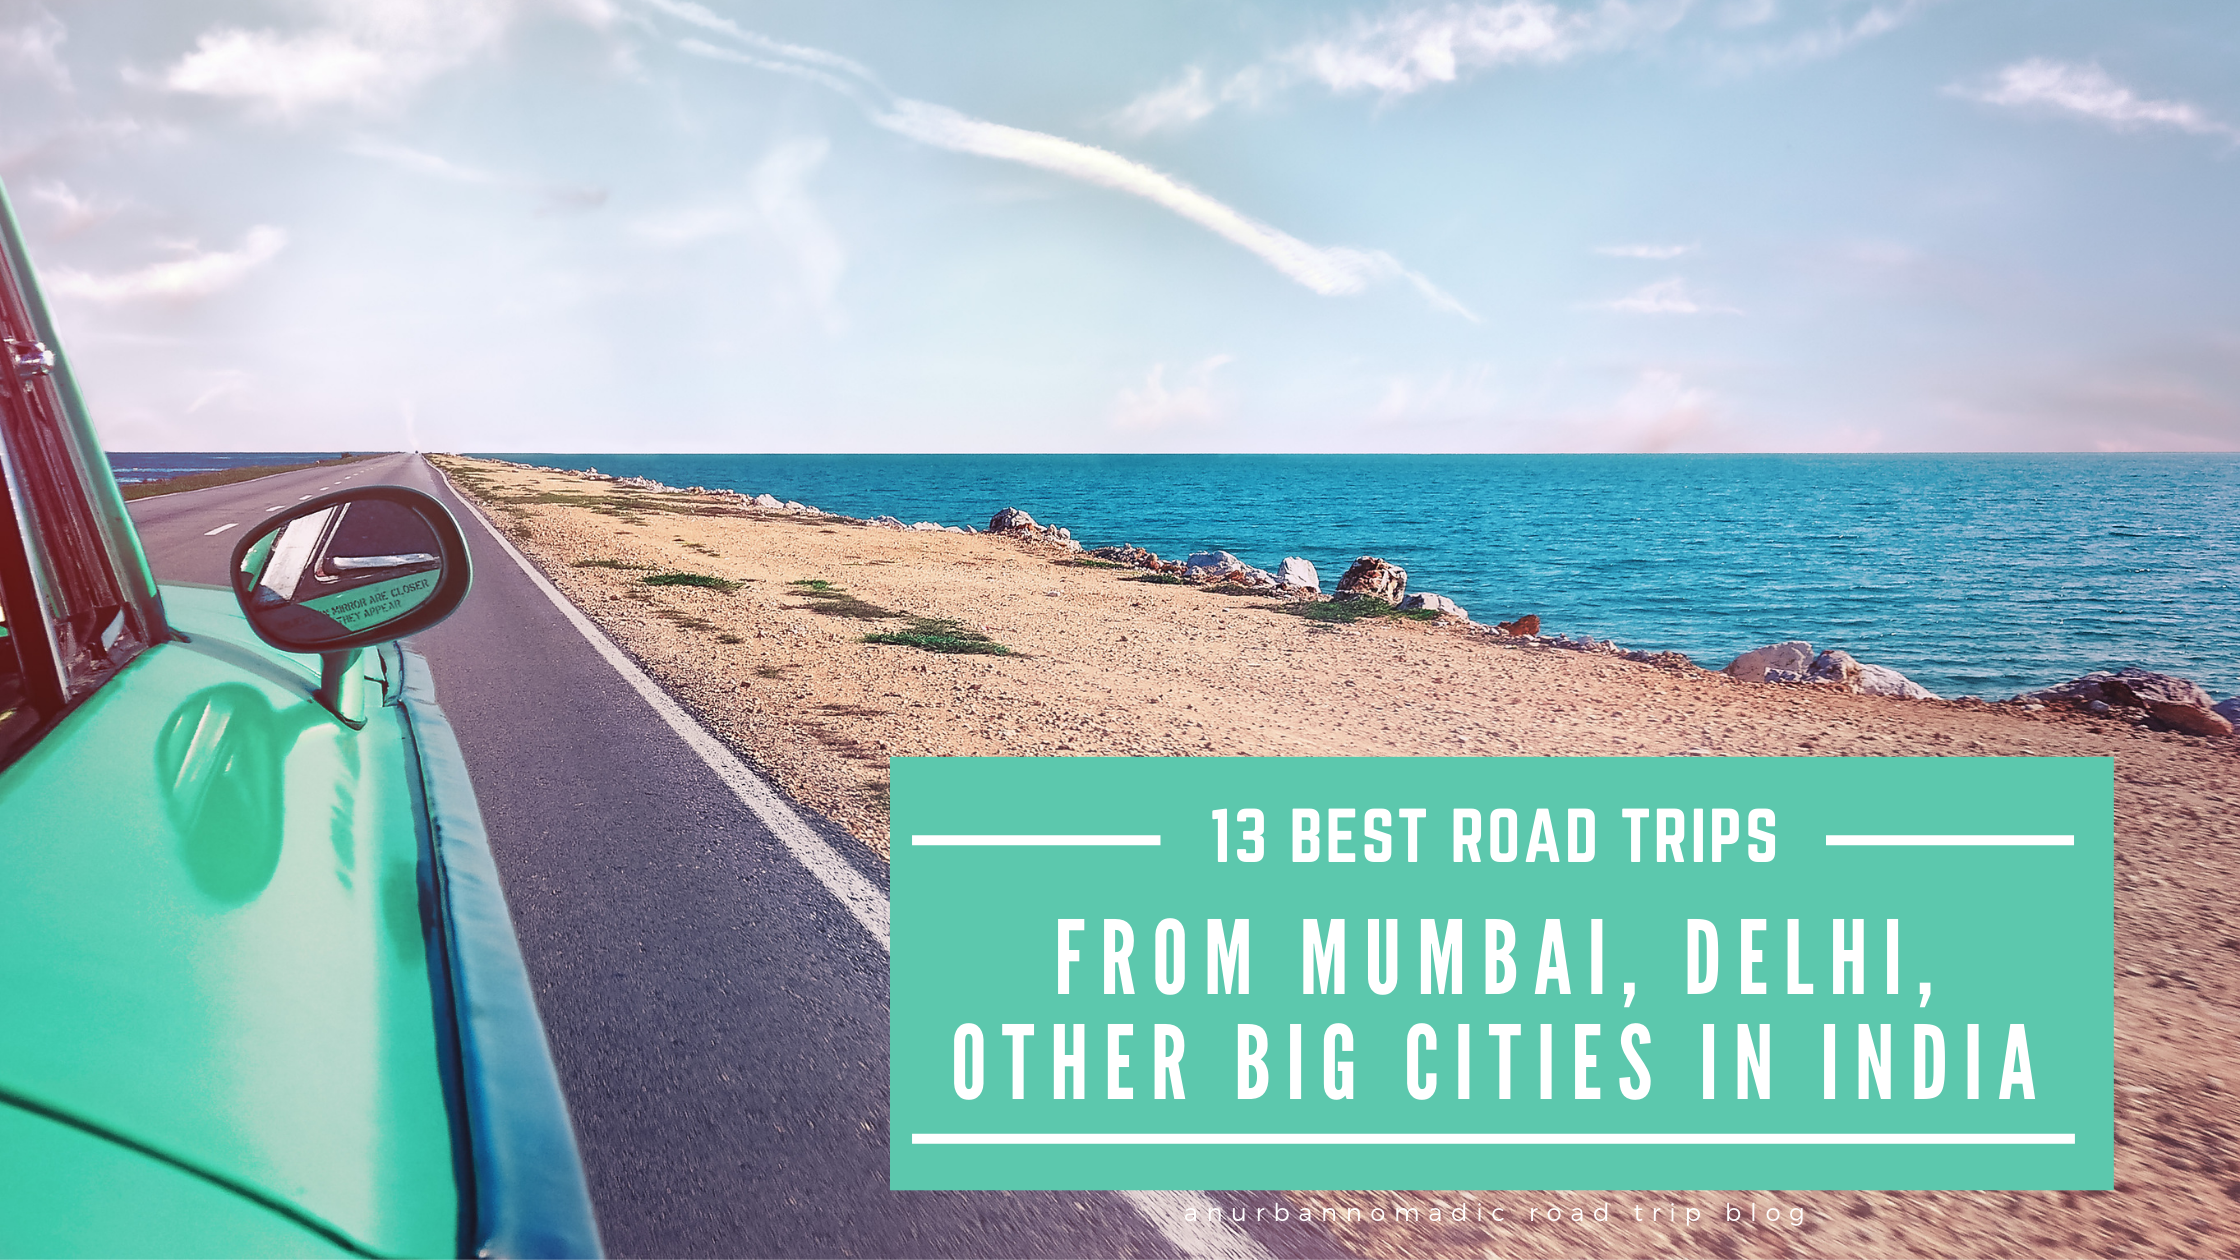 Best Road Trips from Mumbai, Delhi and other big cities